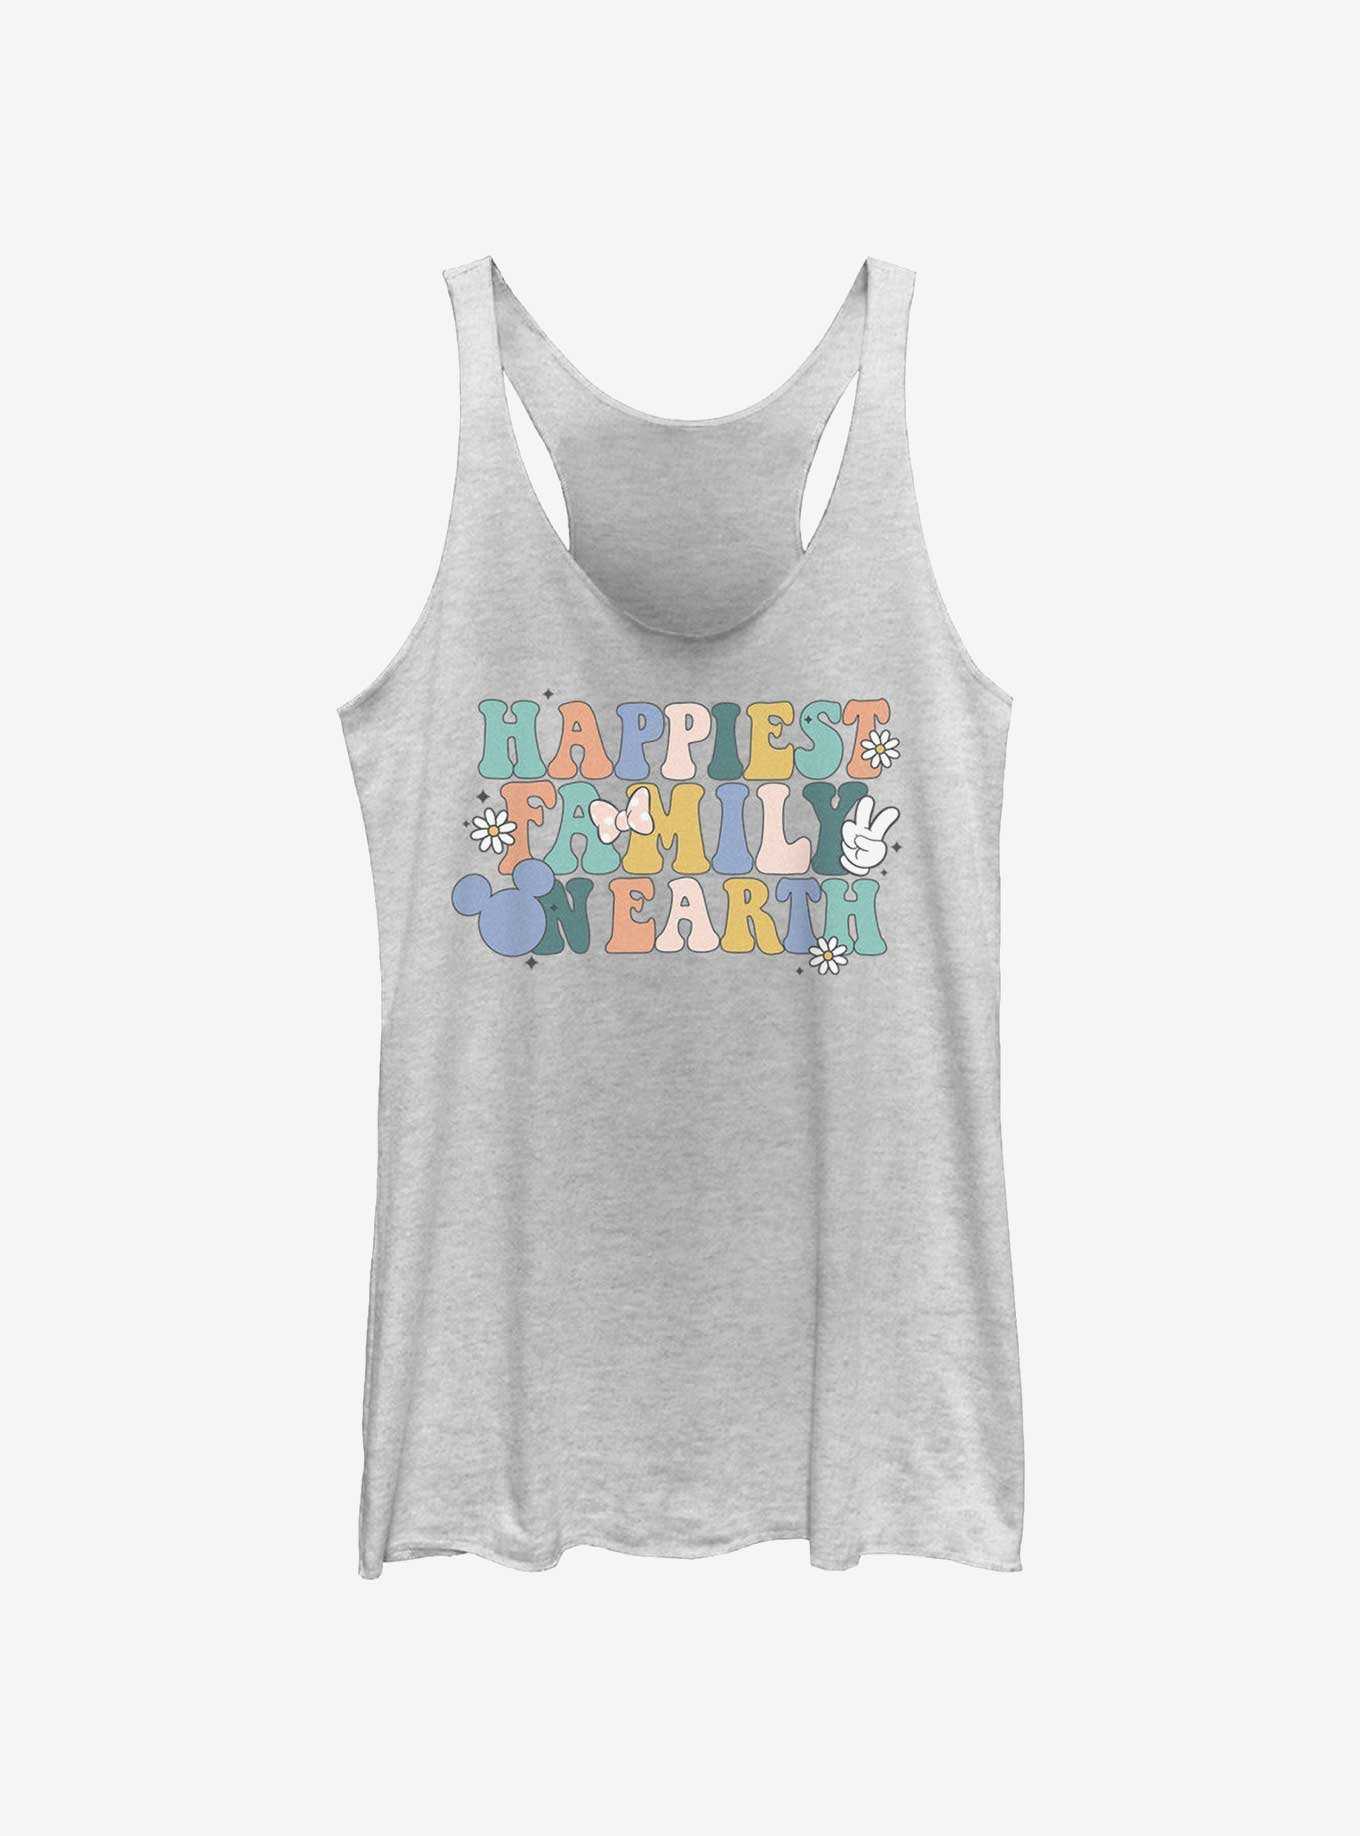 Disney Mickey Mouse Happiest Family On Earth Girls Tank, , hi-res